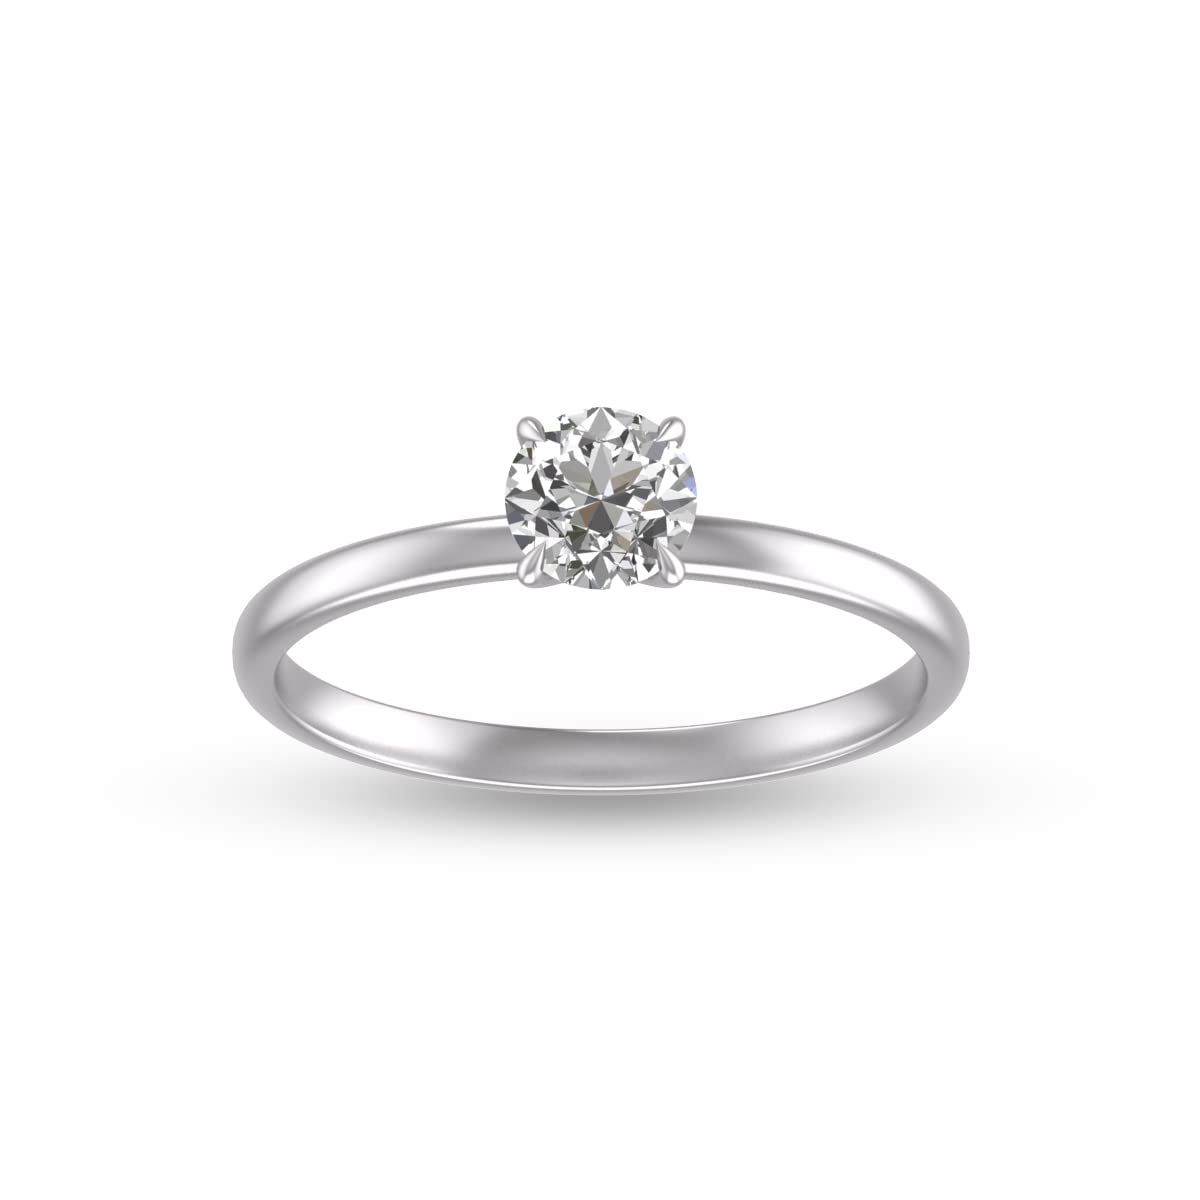 1/2 Carat Natural Diamond Solitaire Ring 14K White Gold 4 Prong (J-K Color I2-I3 Clarity)